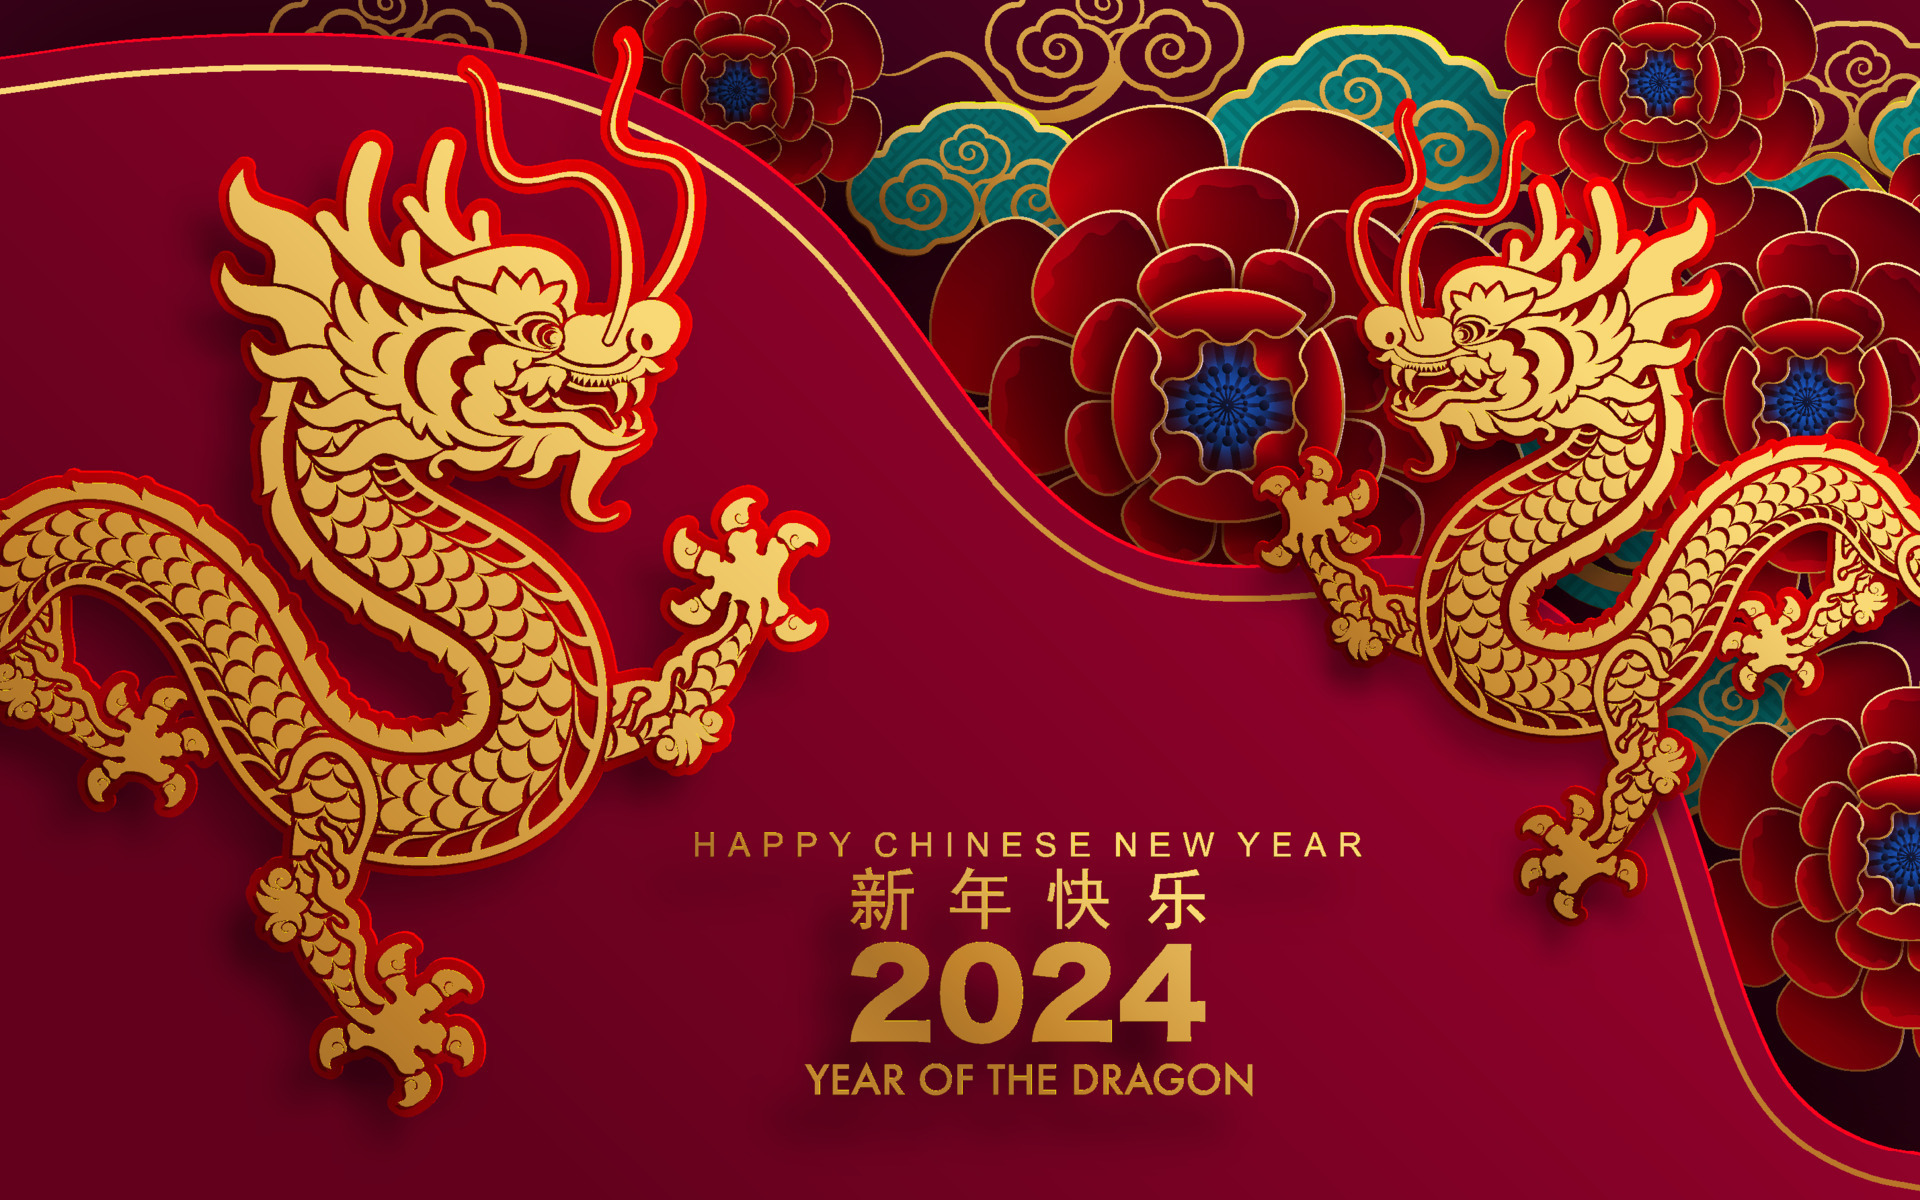 happy-chinese-new-year-2024-the-dragon-zodiac-sign-vector-1698125453-1699337176.jpg